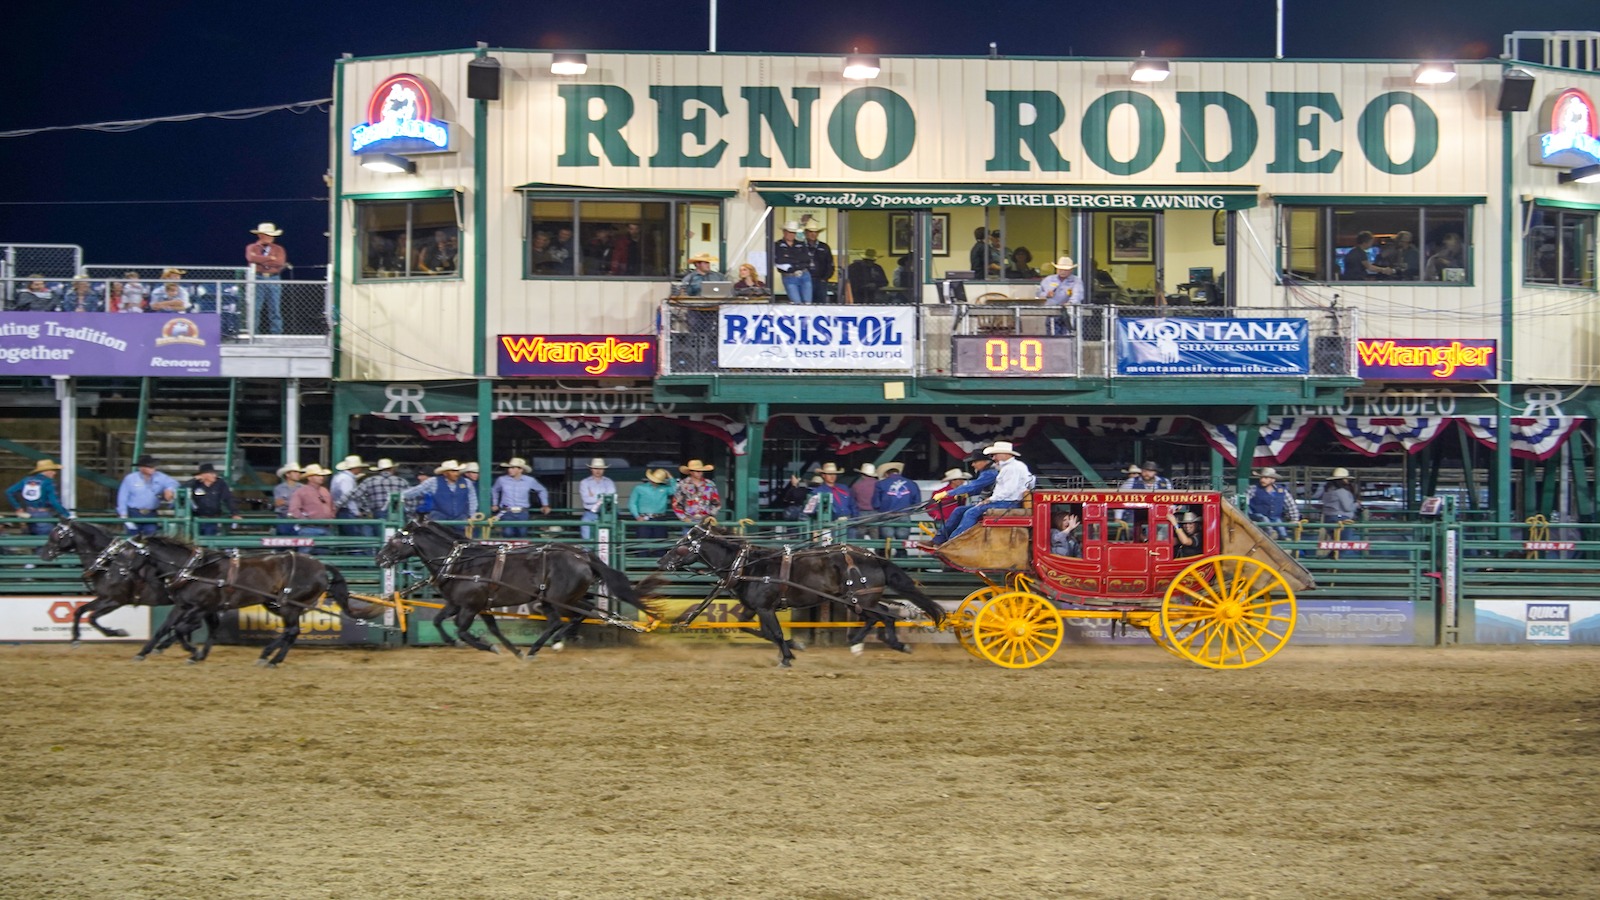 Horses pull carriage at rodeo Tahoe Reno